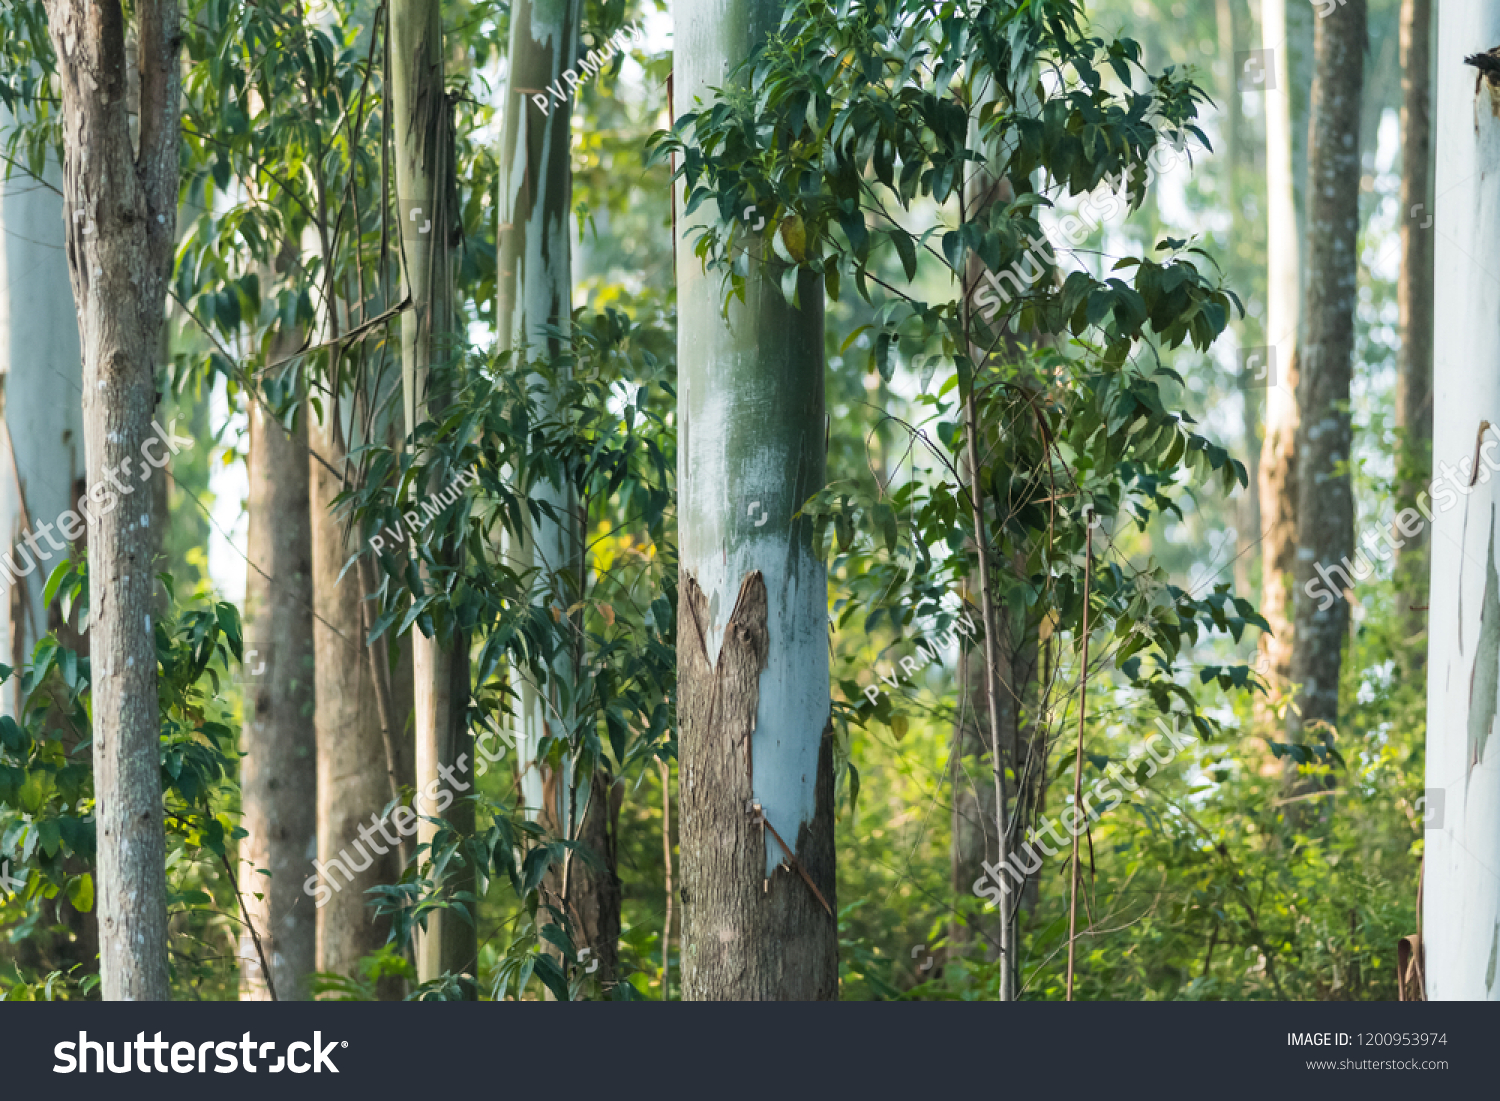 Trunk of Gum trees or Eucalyptus trees from the hilly slopes of Yercaud, Tamilnadu , India. #1200953974